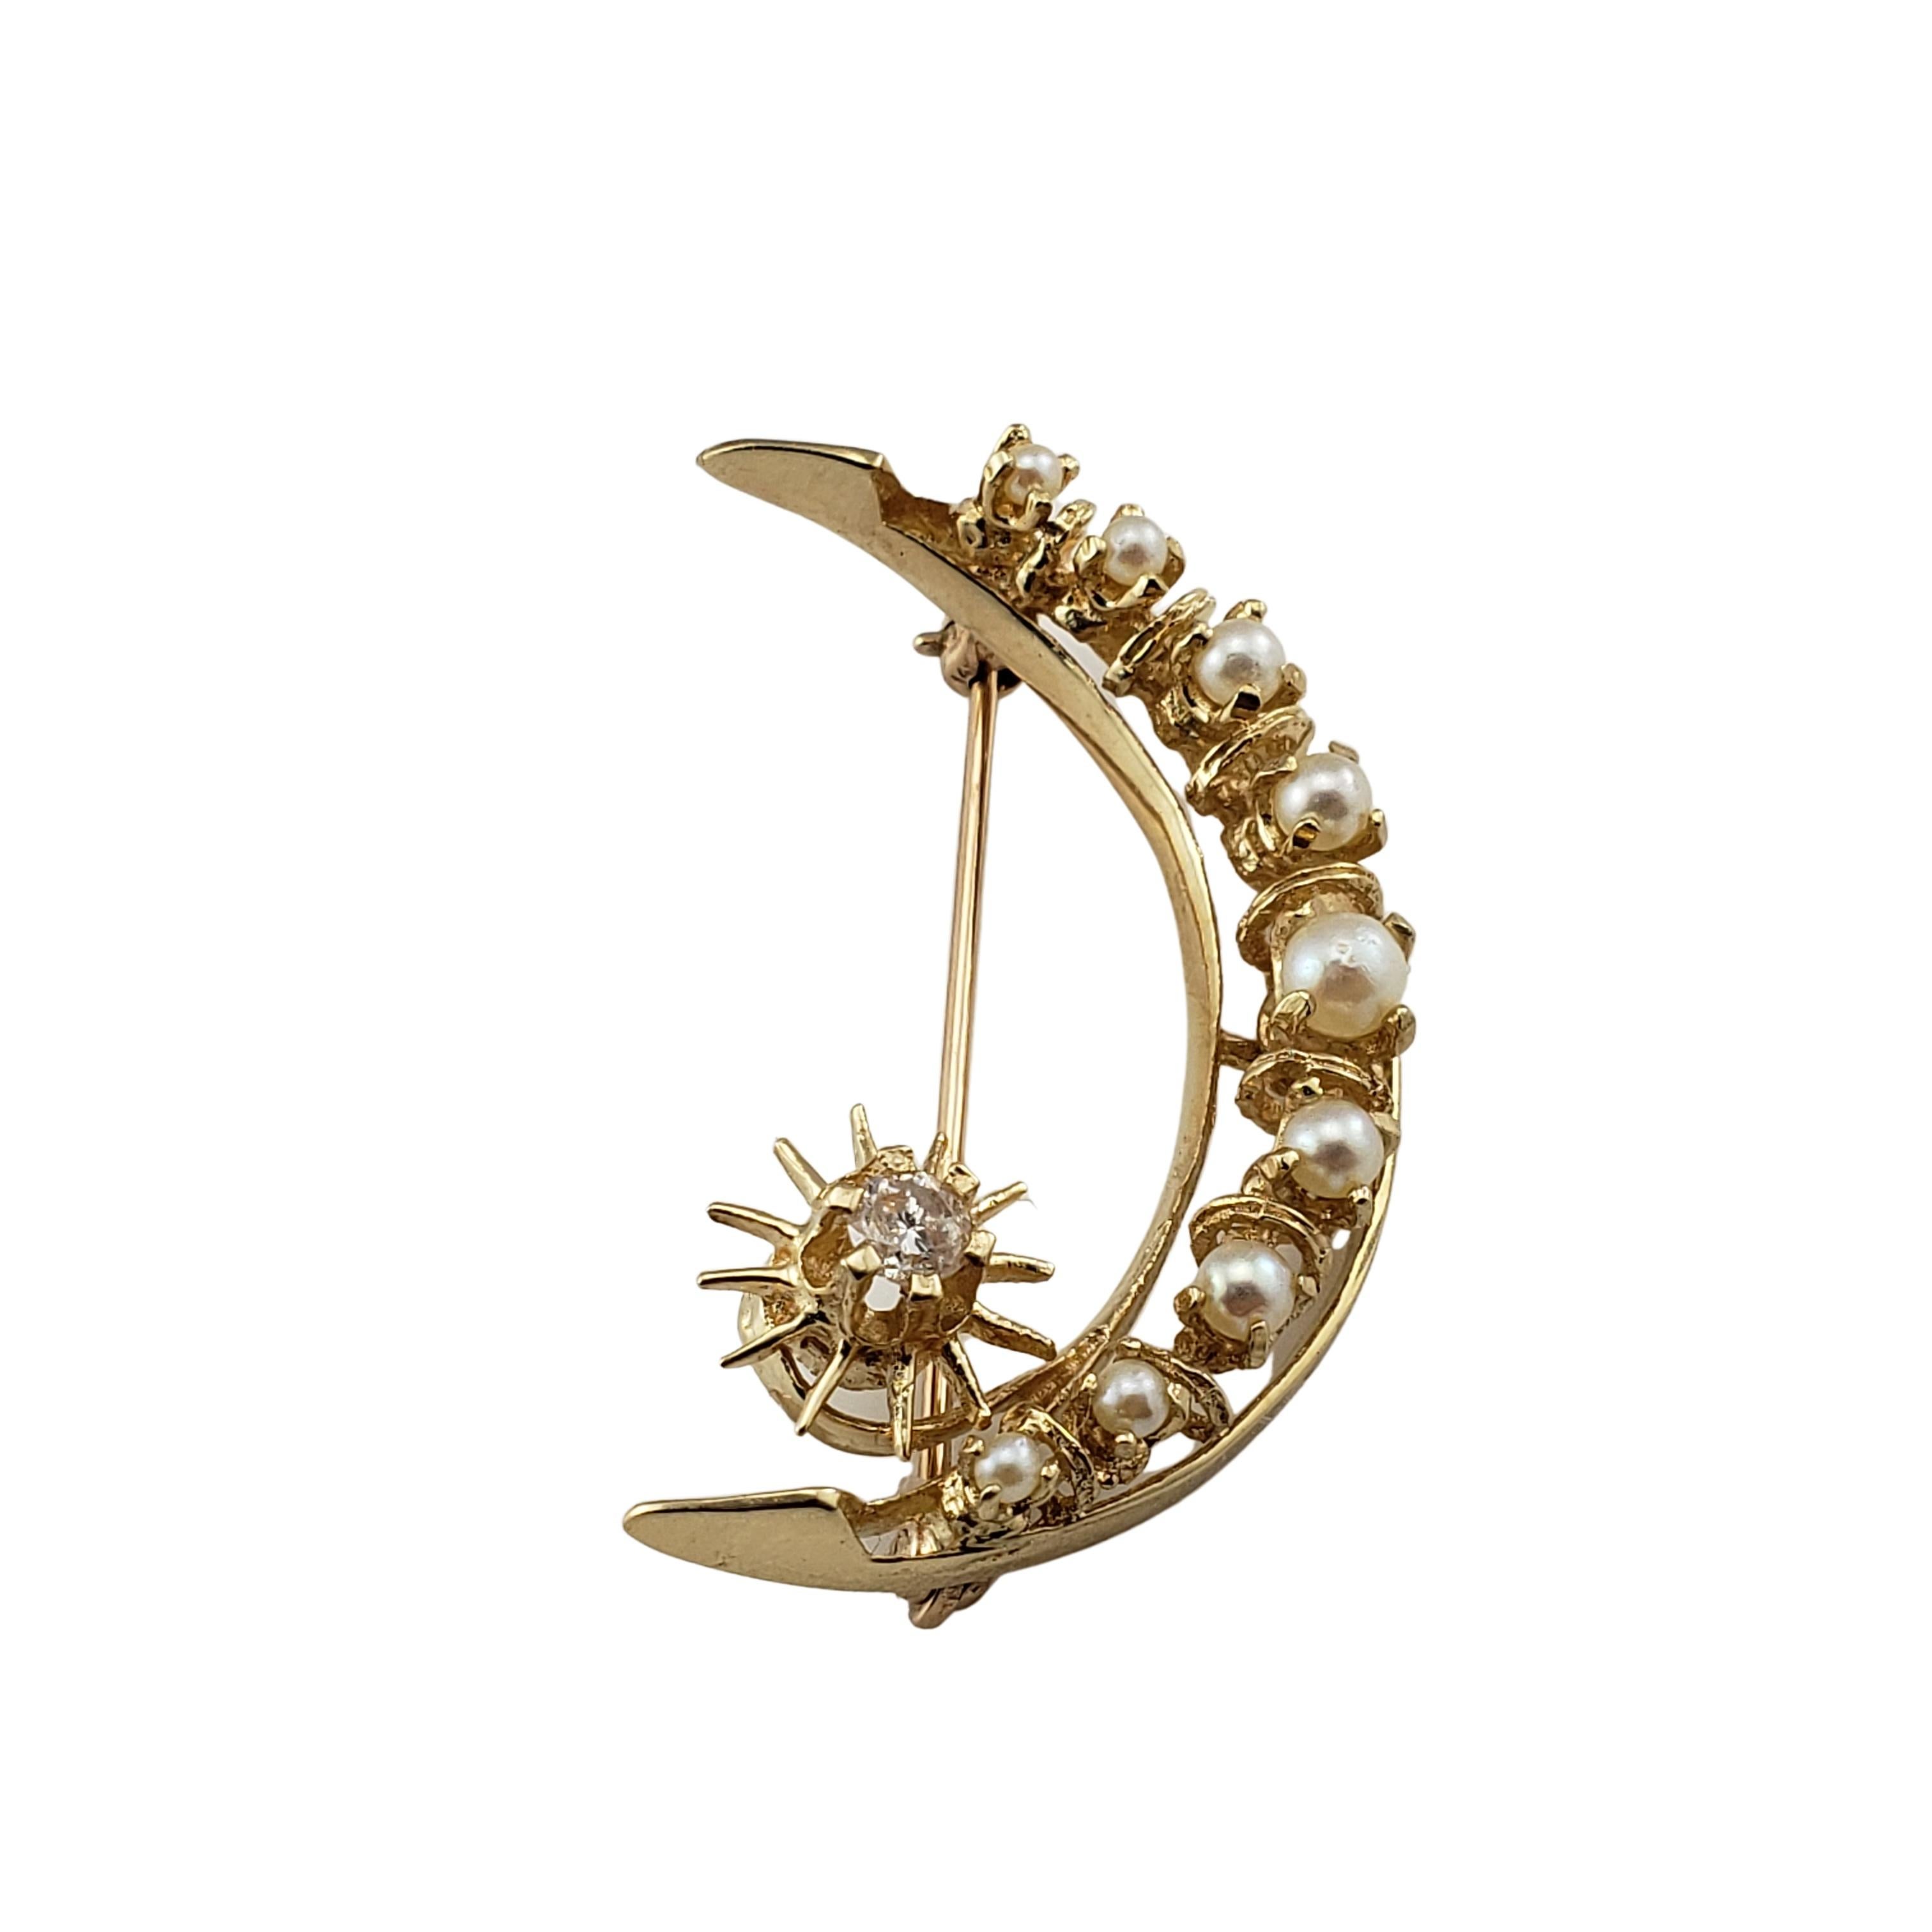 Brilliant Cut Vintage 14 Karat Yellow Gold, Pearl and Diamond Crescent Moon Pin/Brooch For Sale